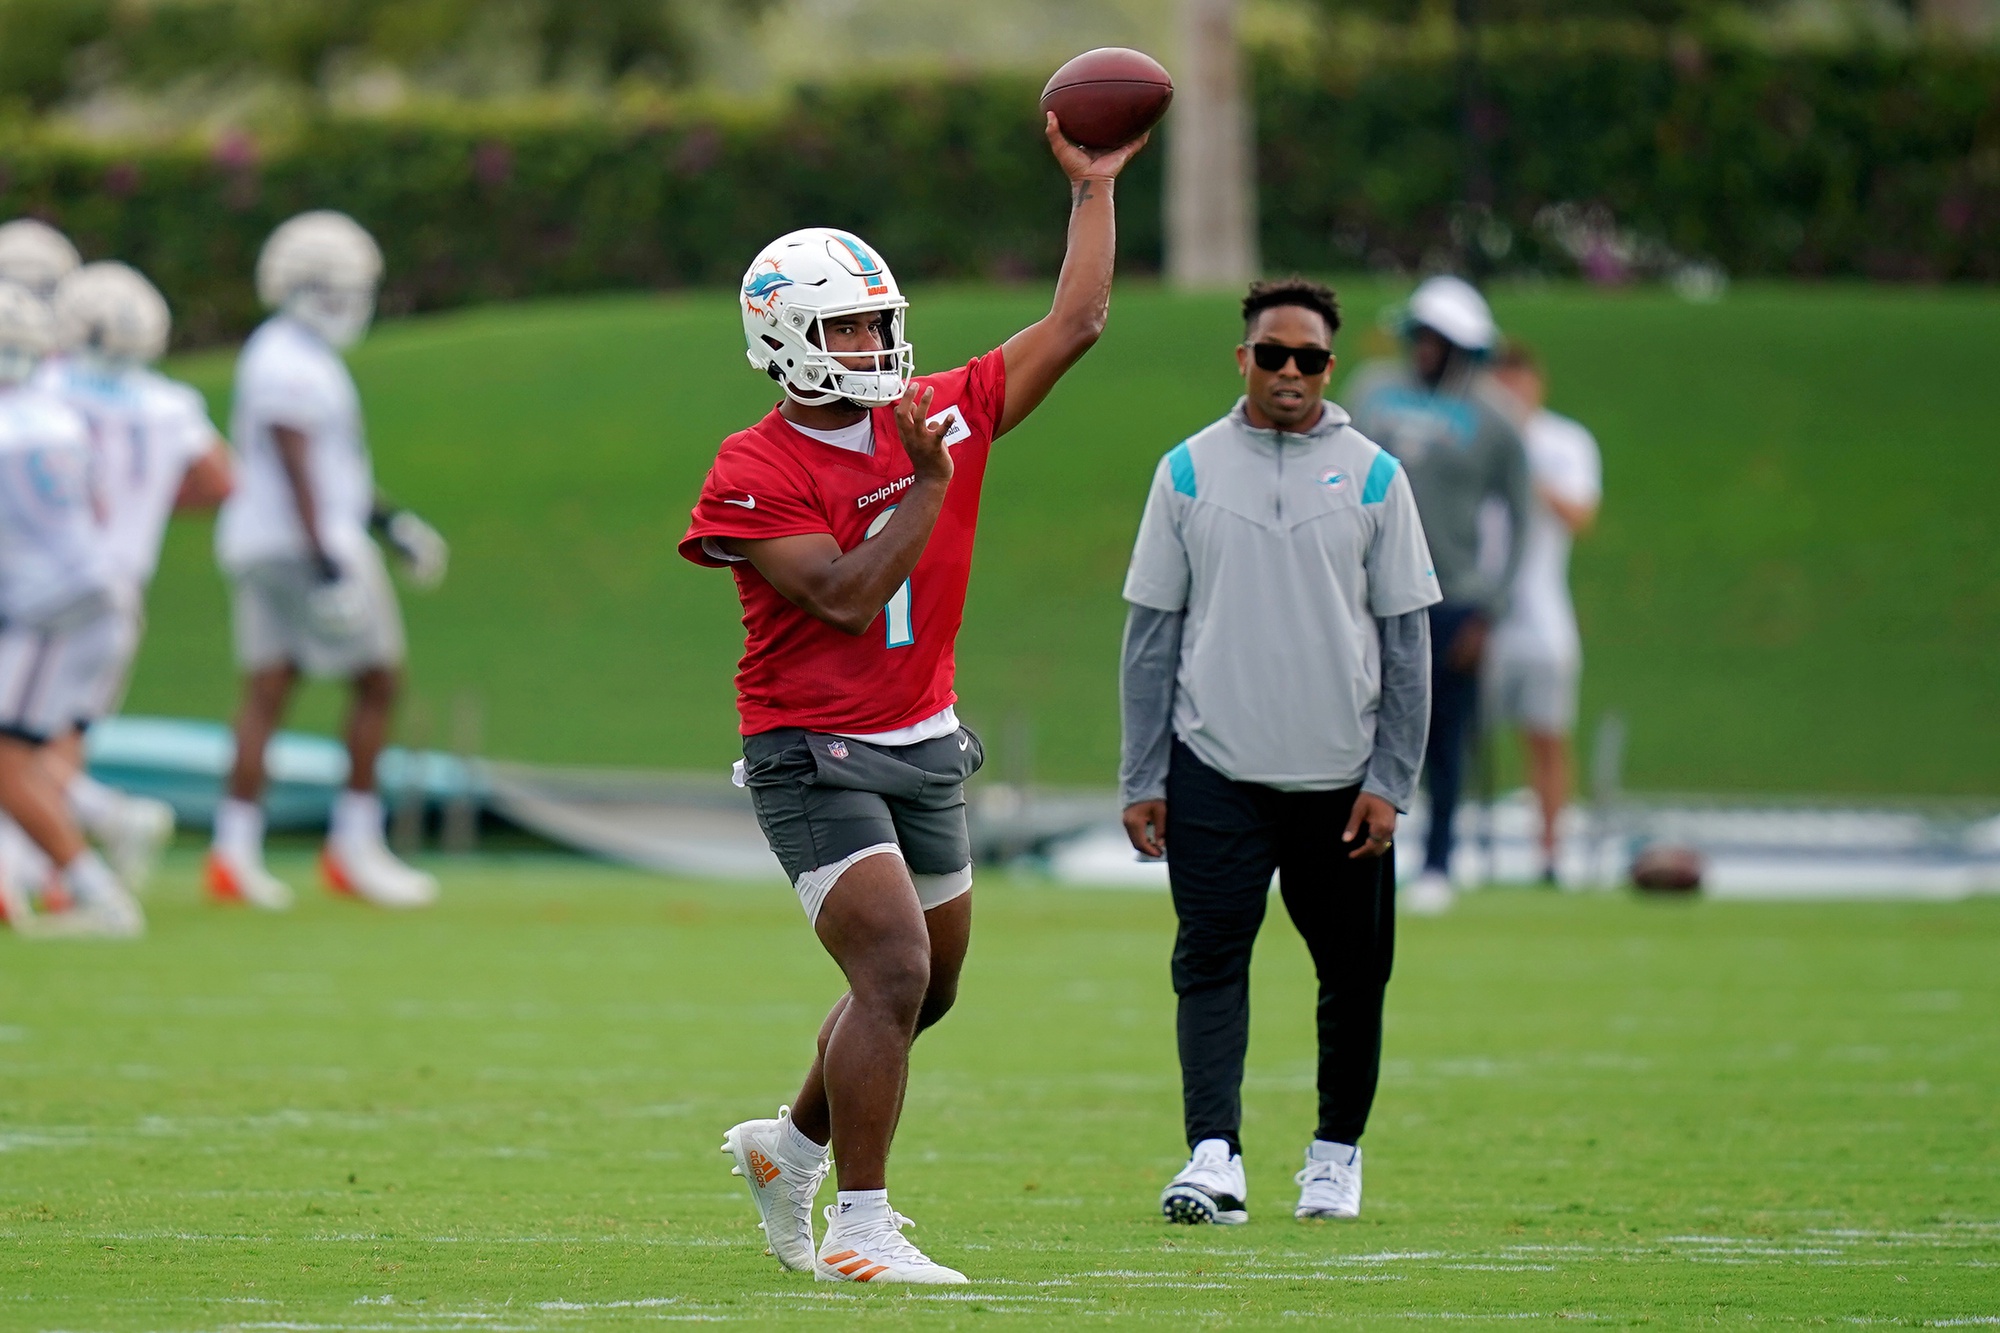 https://static.profootballnetwork.com/wp-content/uploads/2022/07/15074436/Miami-Dolphins-training-camp-observations-An-honest-conversation-about-Tua-Tagovailoas-arm-strength.jpg